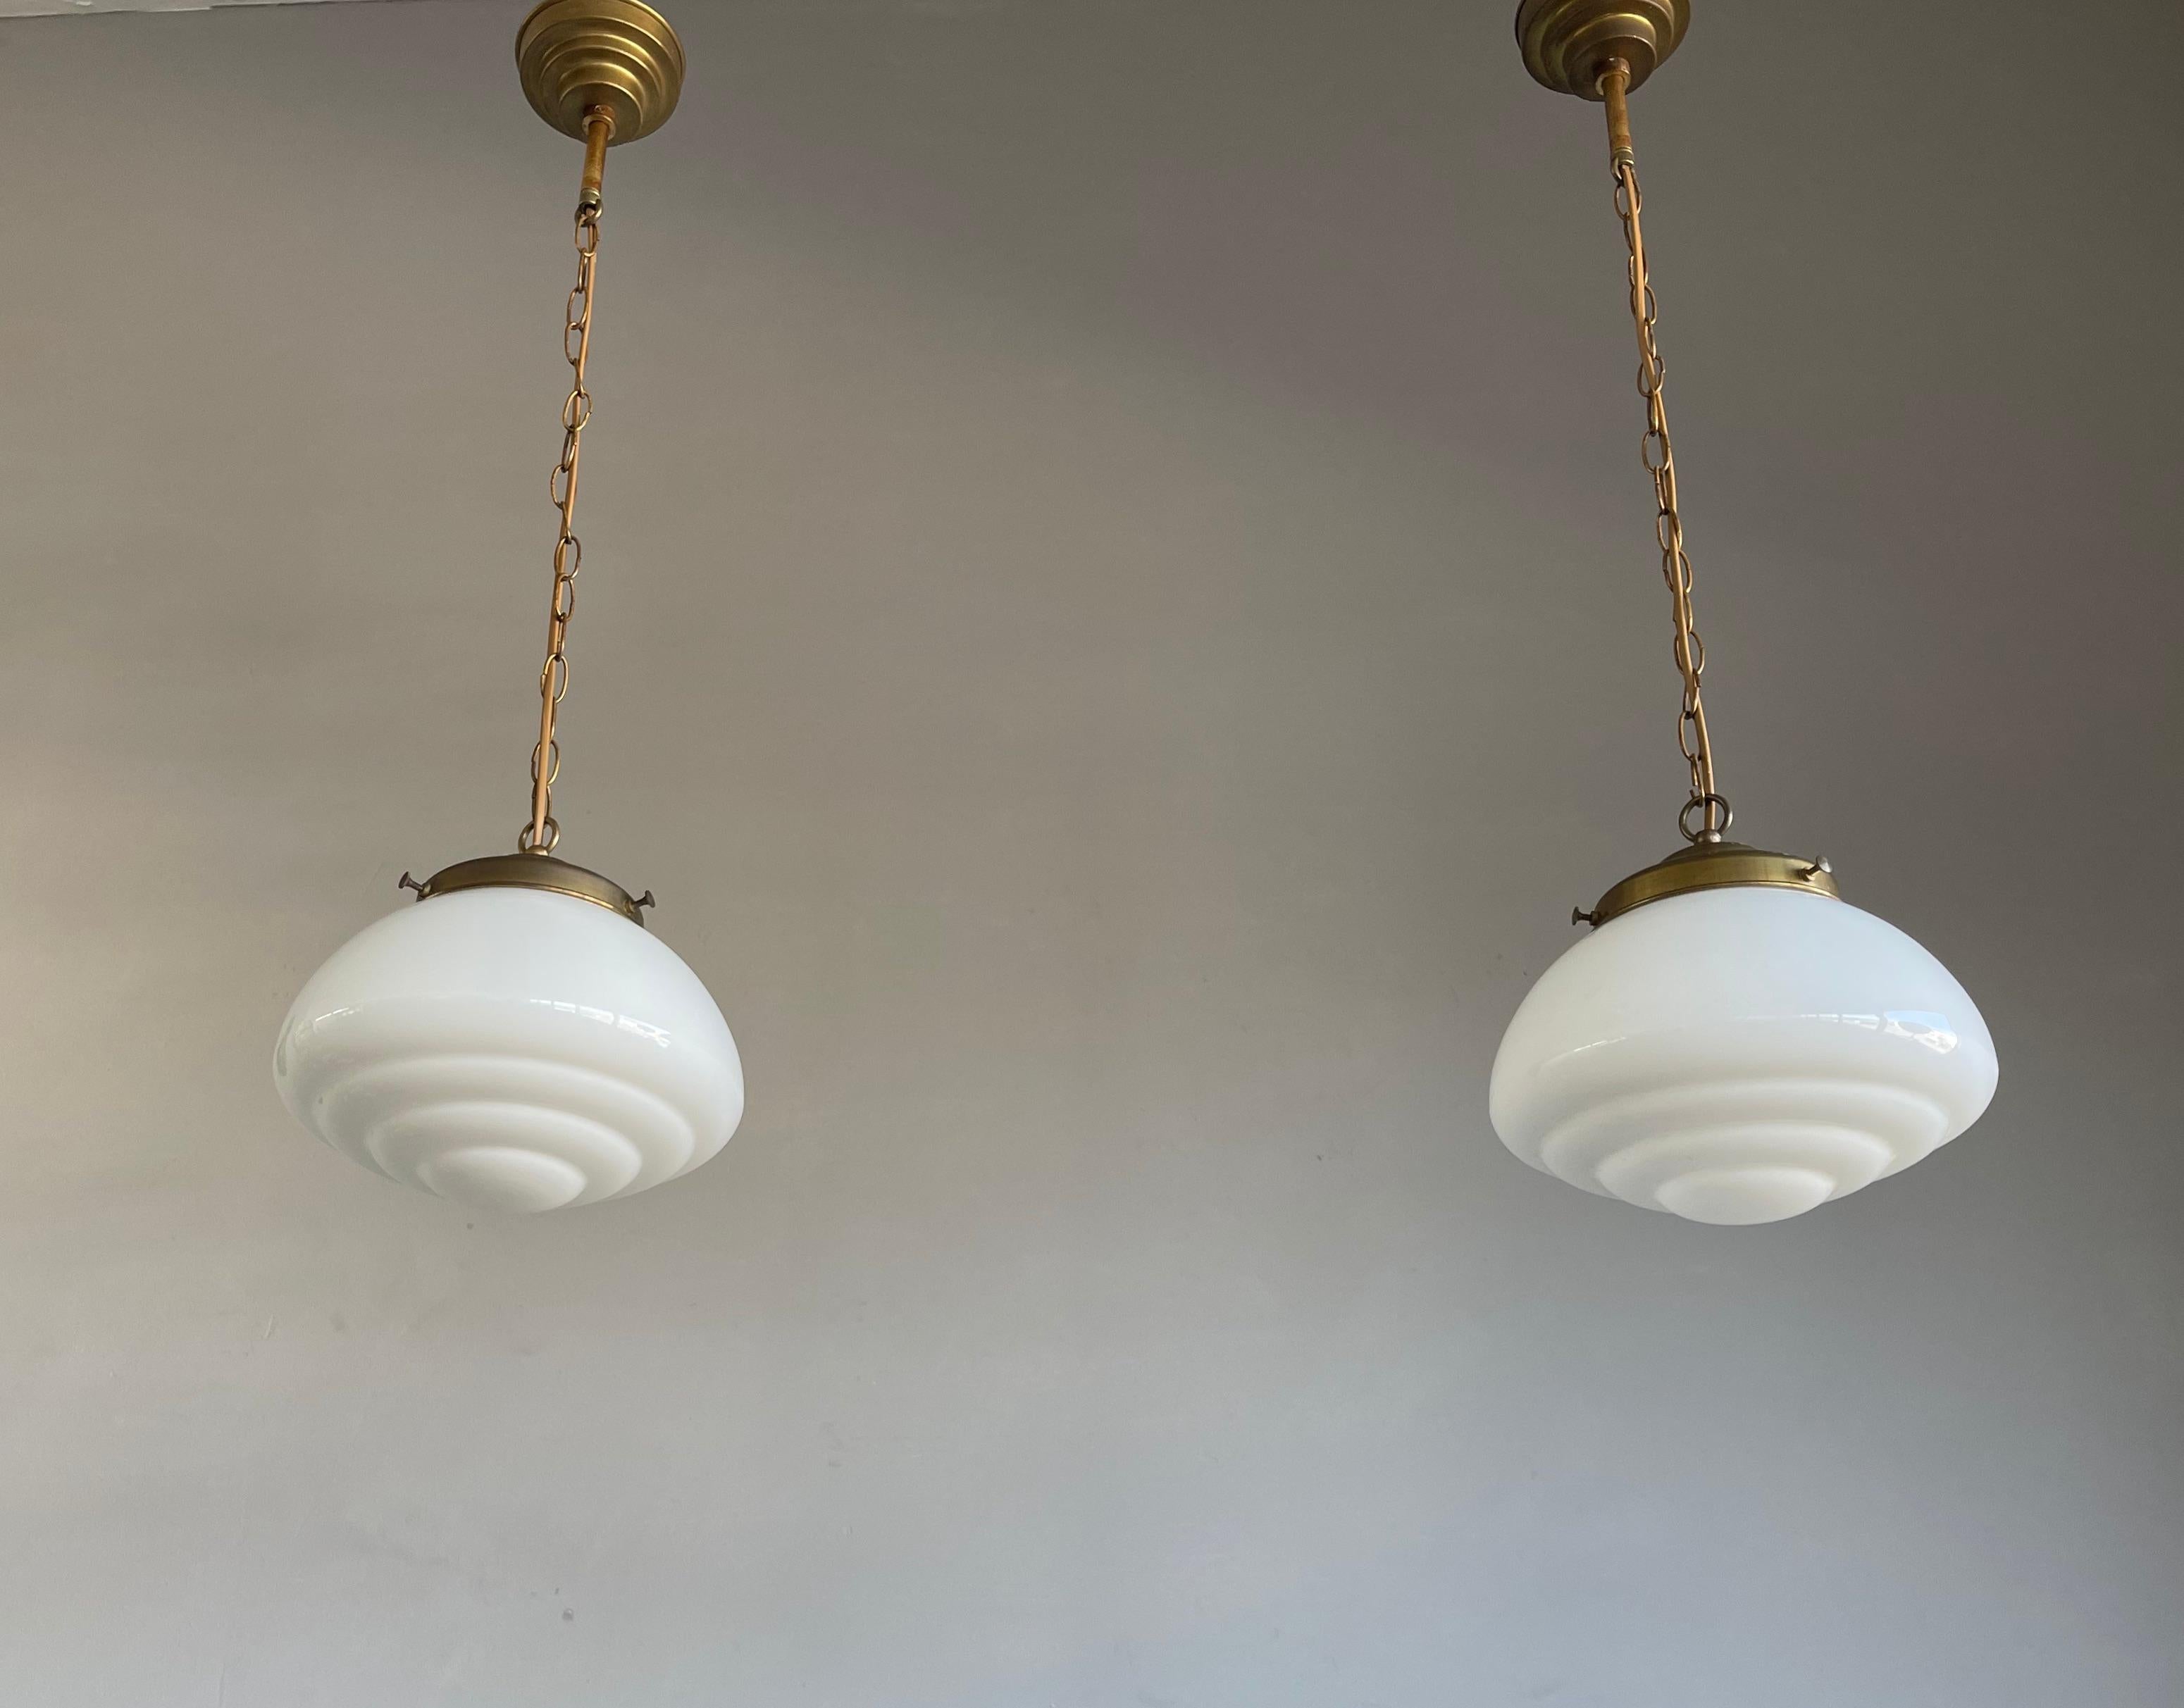 Beautiful shape and excellent condition pendants.

Finding one rare original light fixture is a good thing, but finding two is always that extra bit special. So if you are looking for a beautiful pair of pendants to grace your entry hall, kitchen or